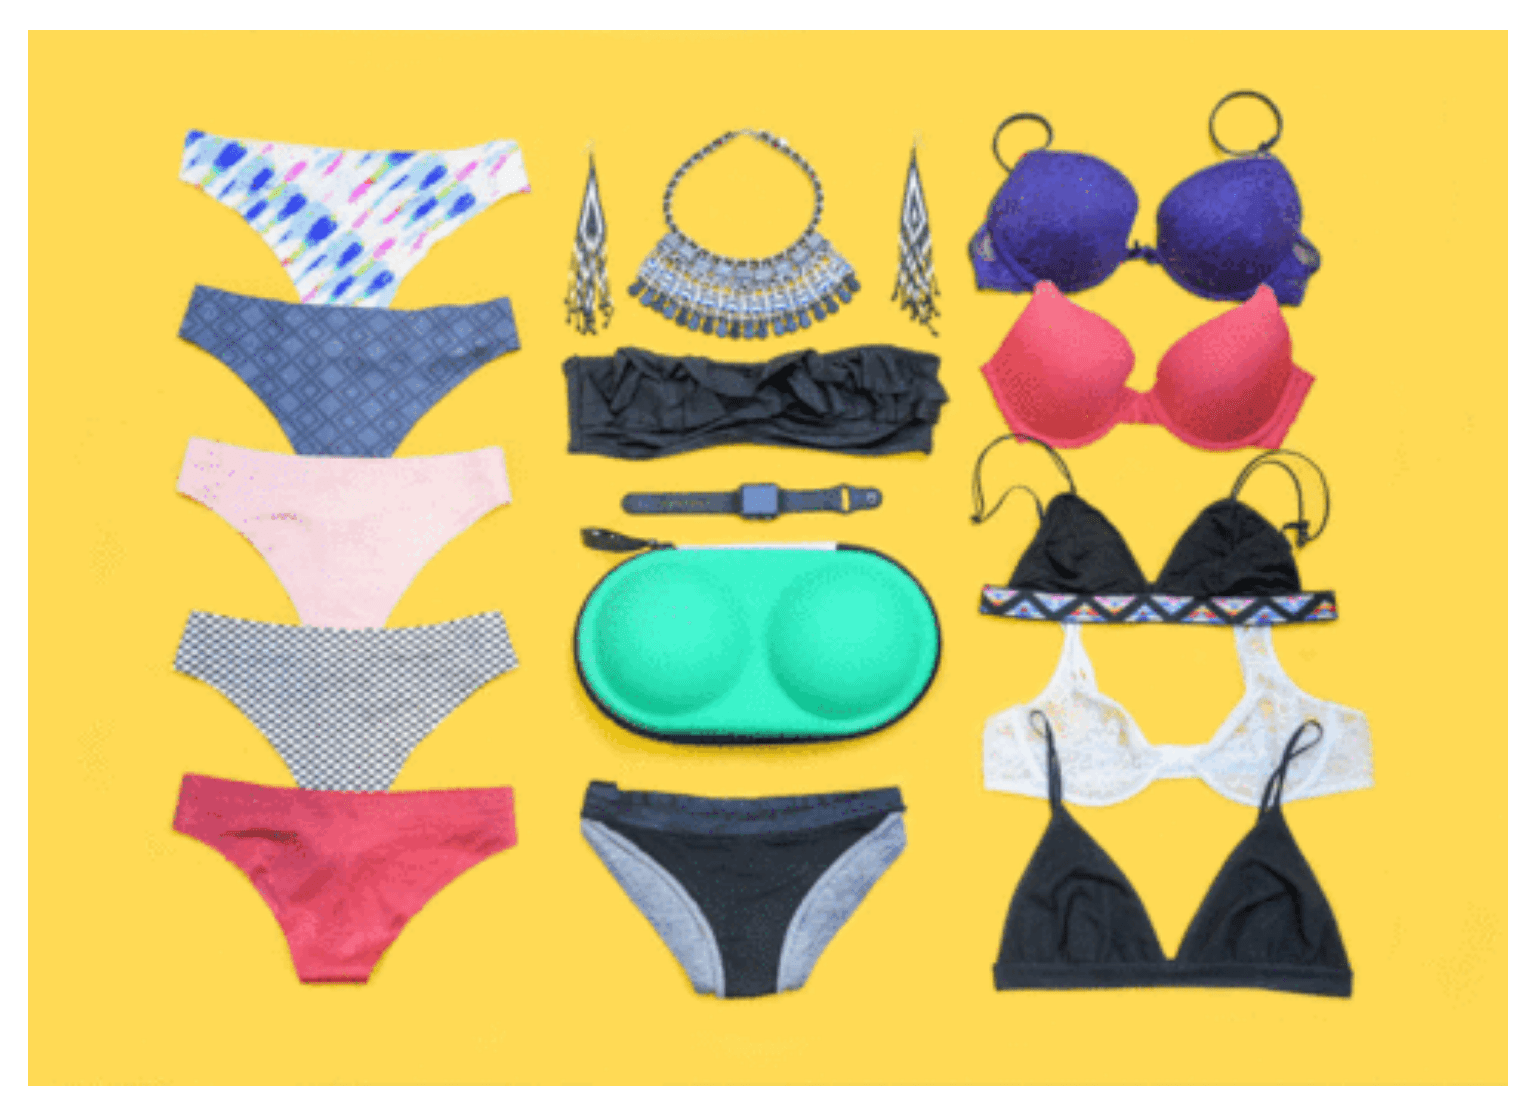  Do you think all of these items could fit in one Bra Kitty?? Click the photo to see this adorable animation on their website!  